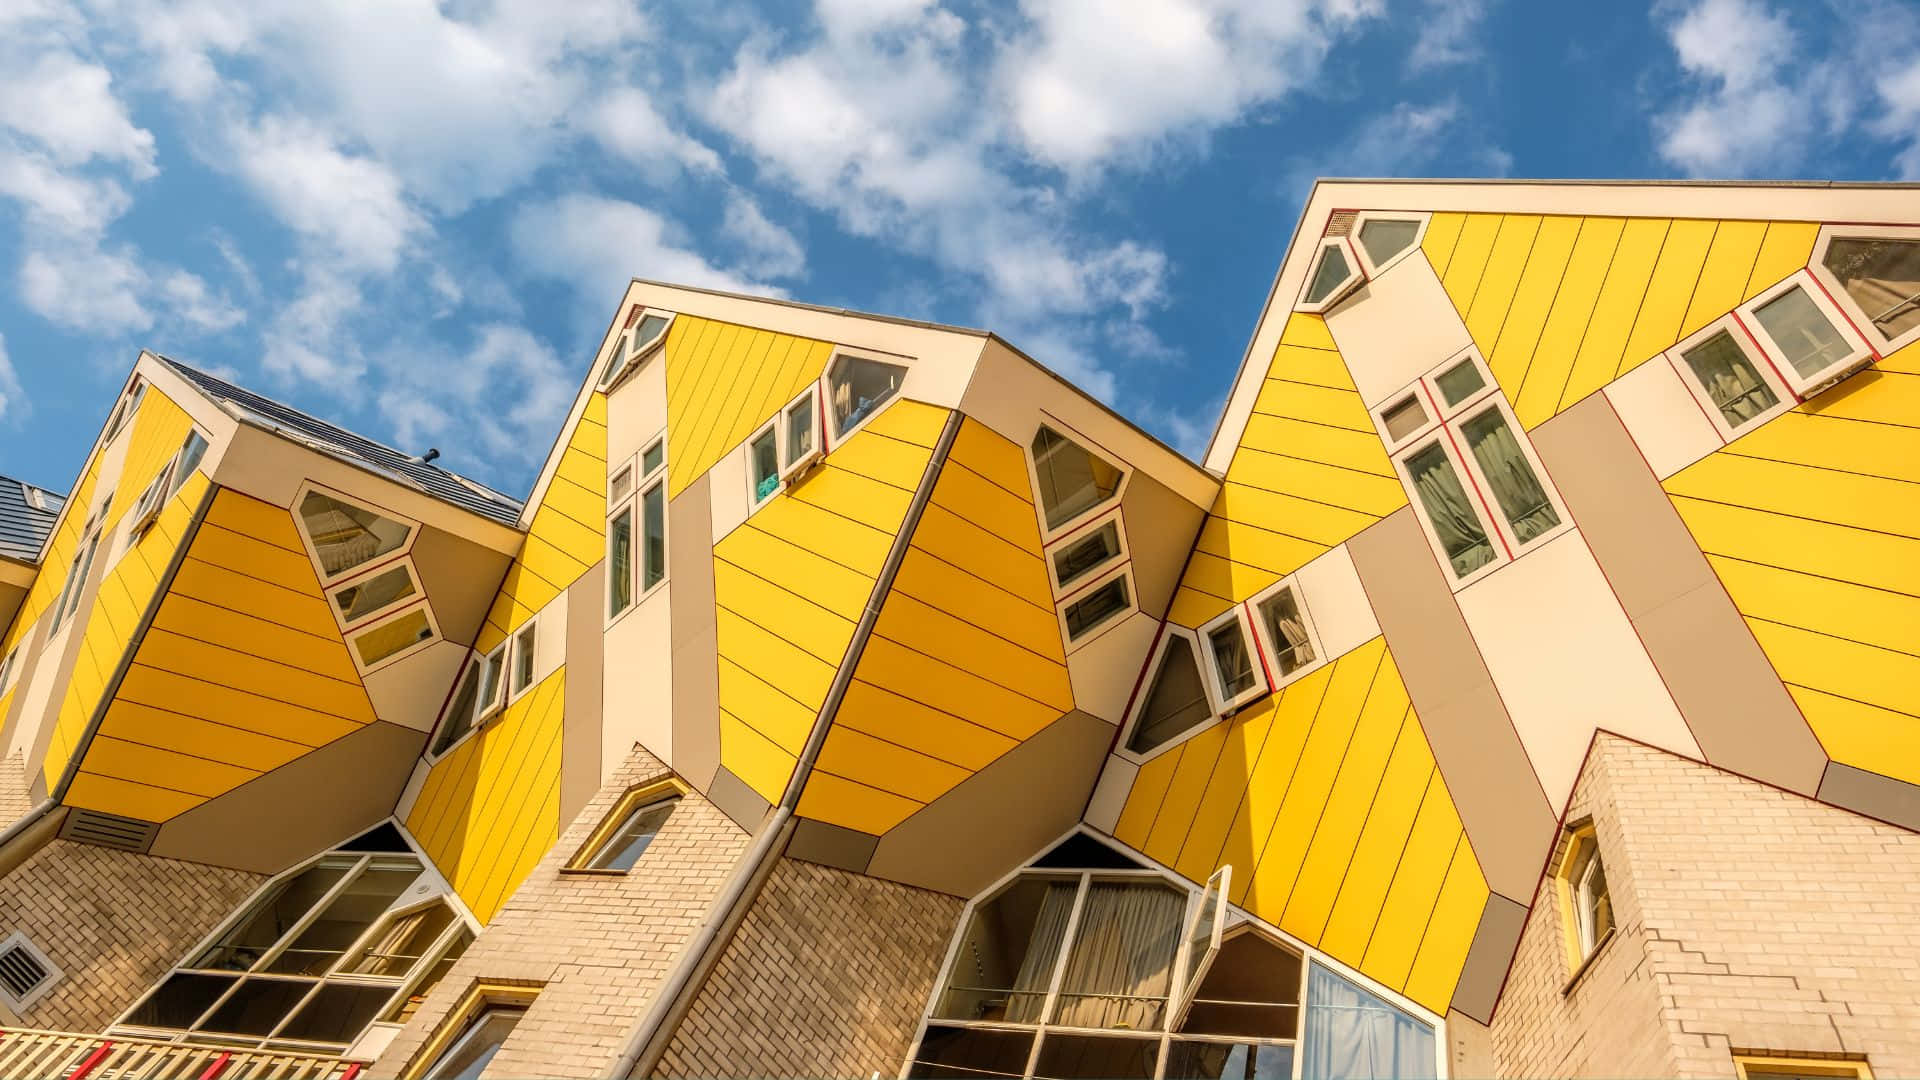 Rotterdam Cube Houses Sky View Wallpaper